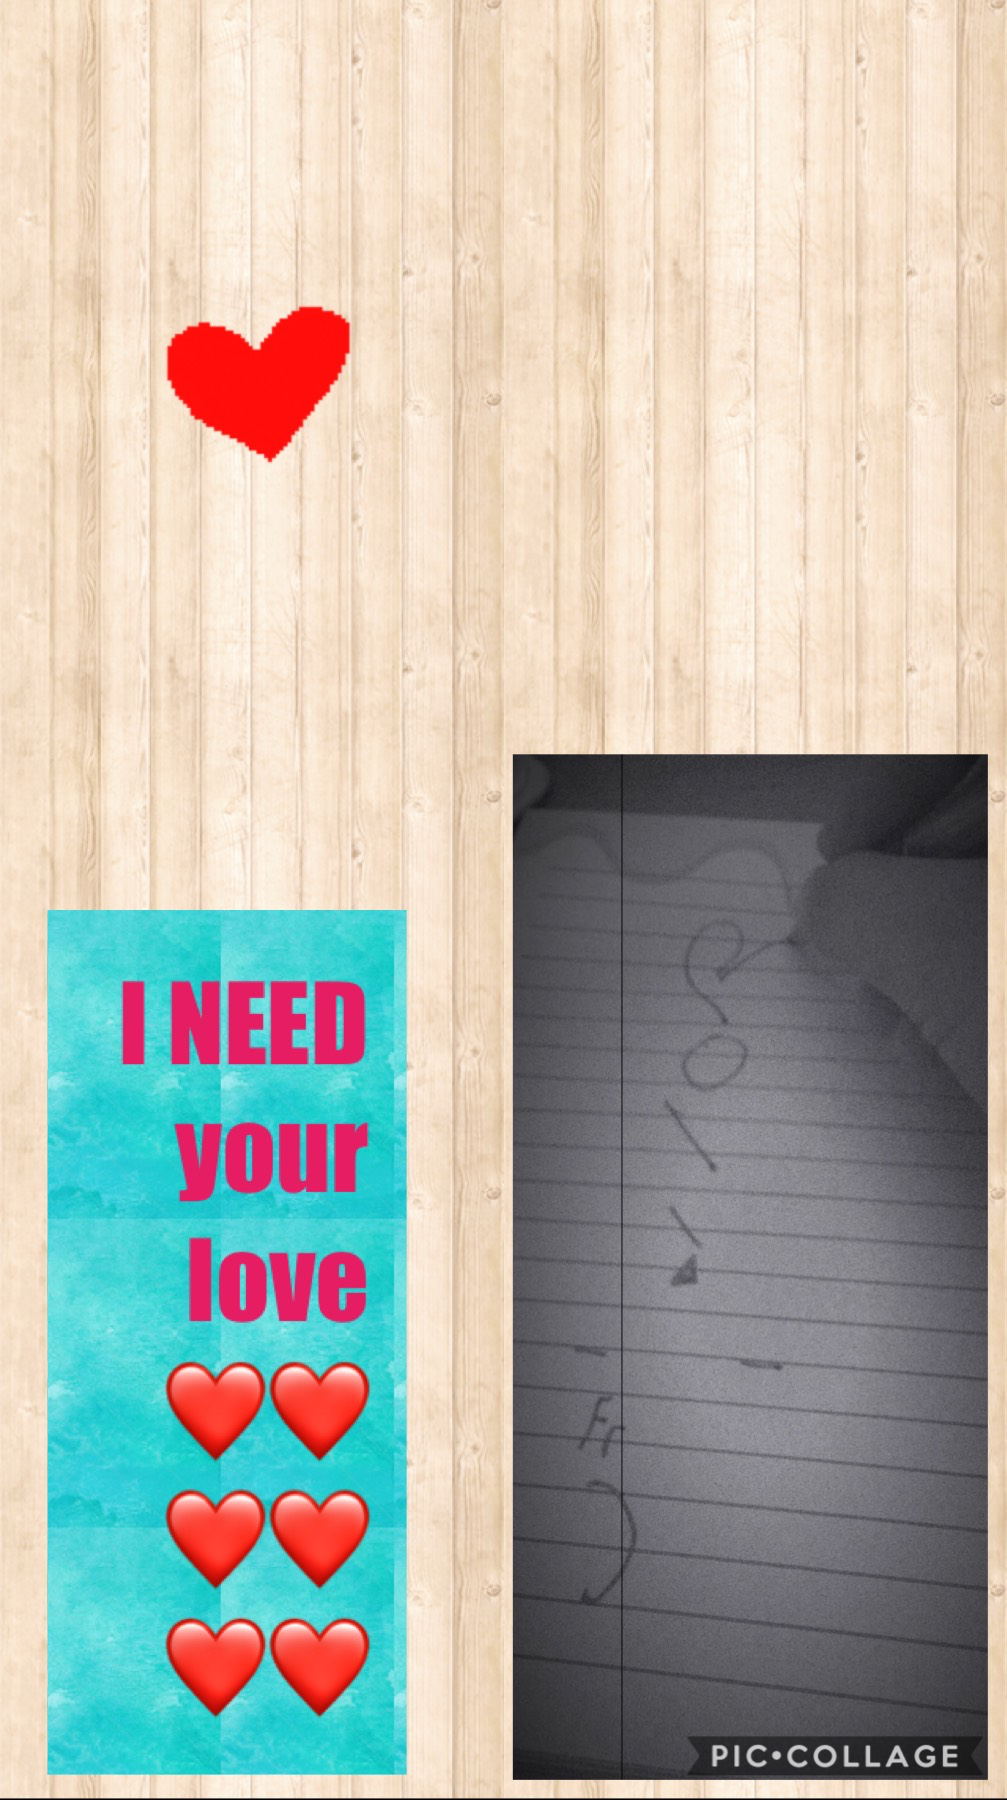 I NEED your love !!!